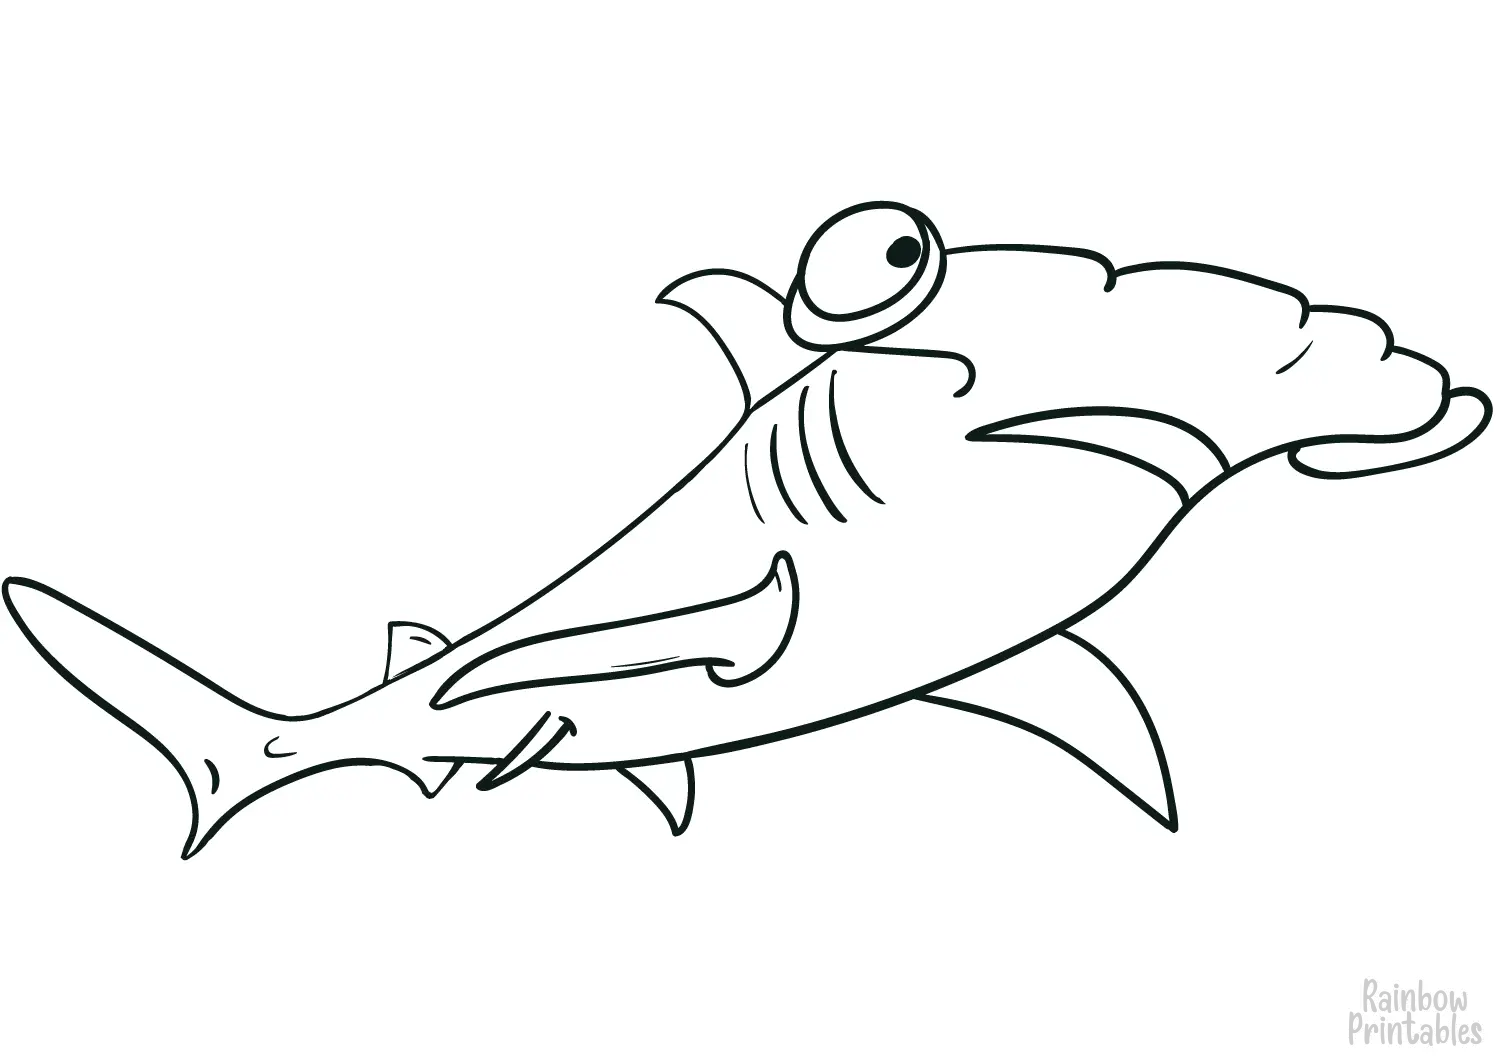 SIMPLE-EASY-line-drawings-HAMMERHEAD-SHARK-coloring-page-for-kids